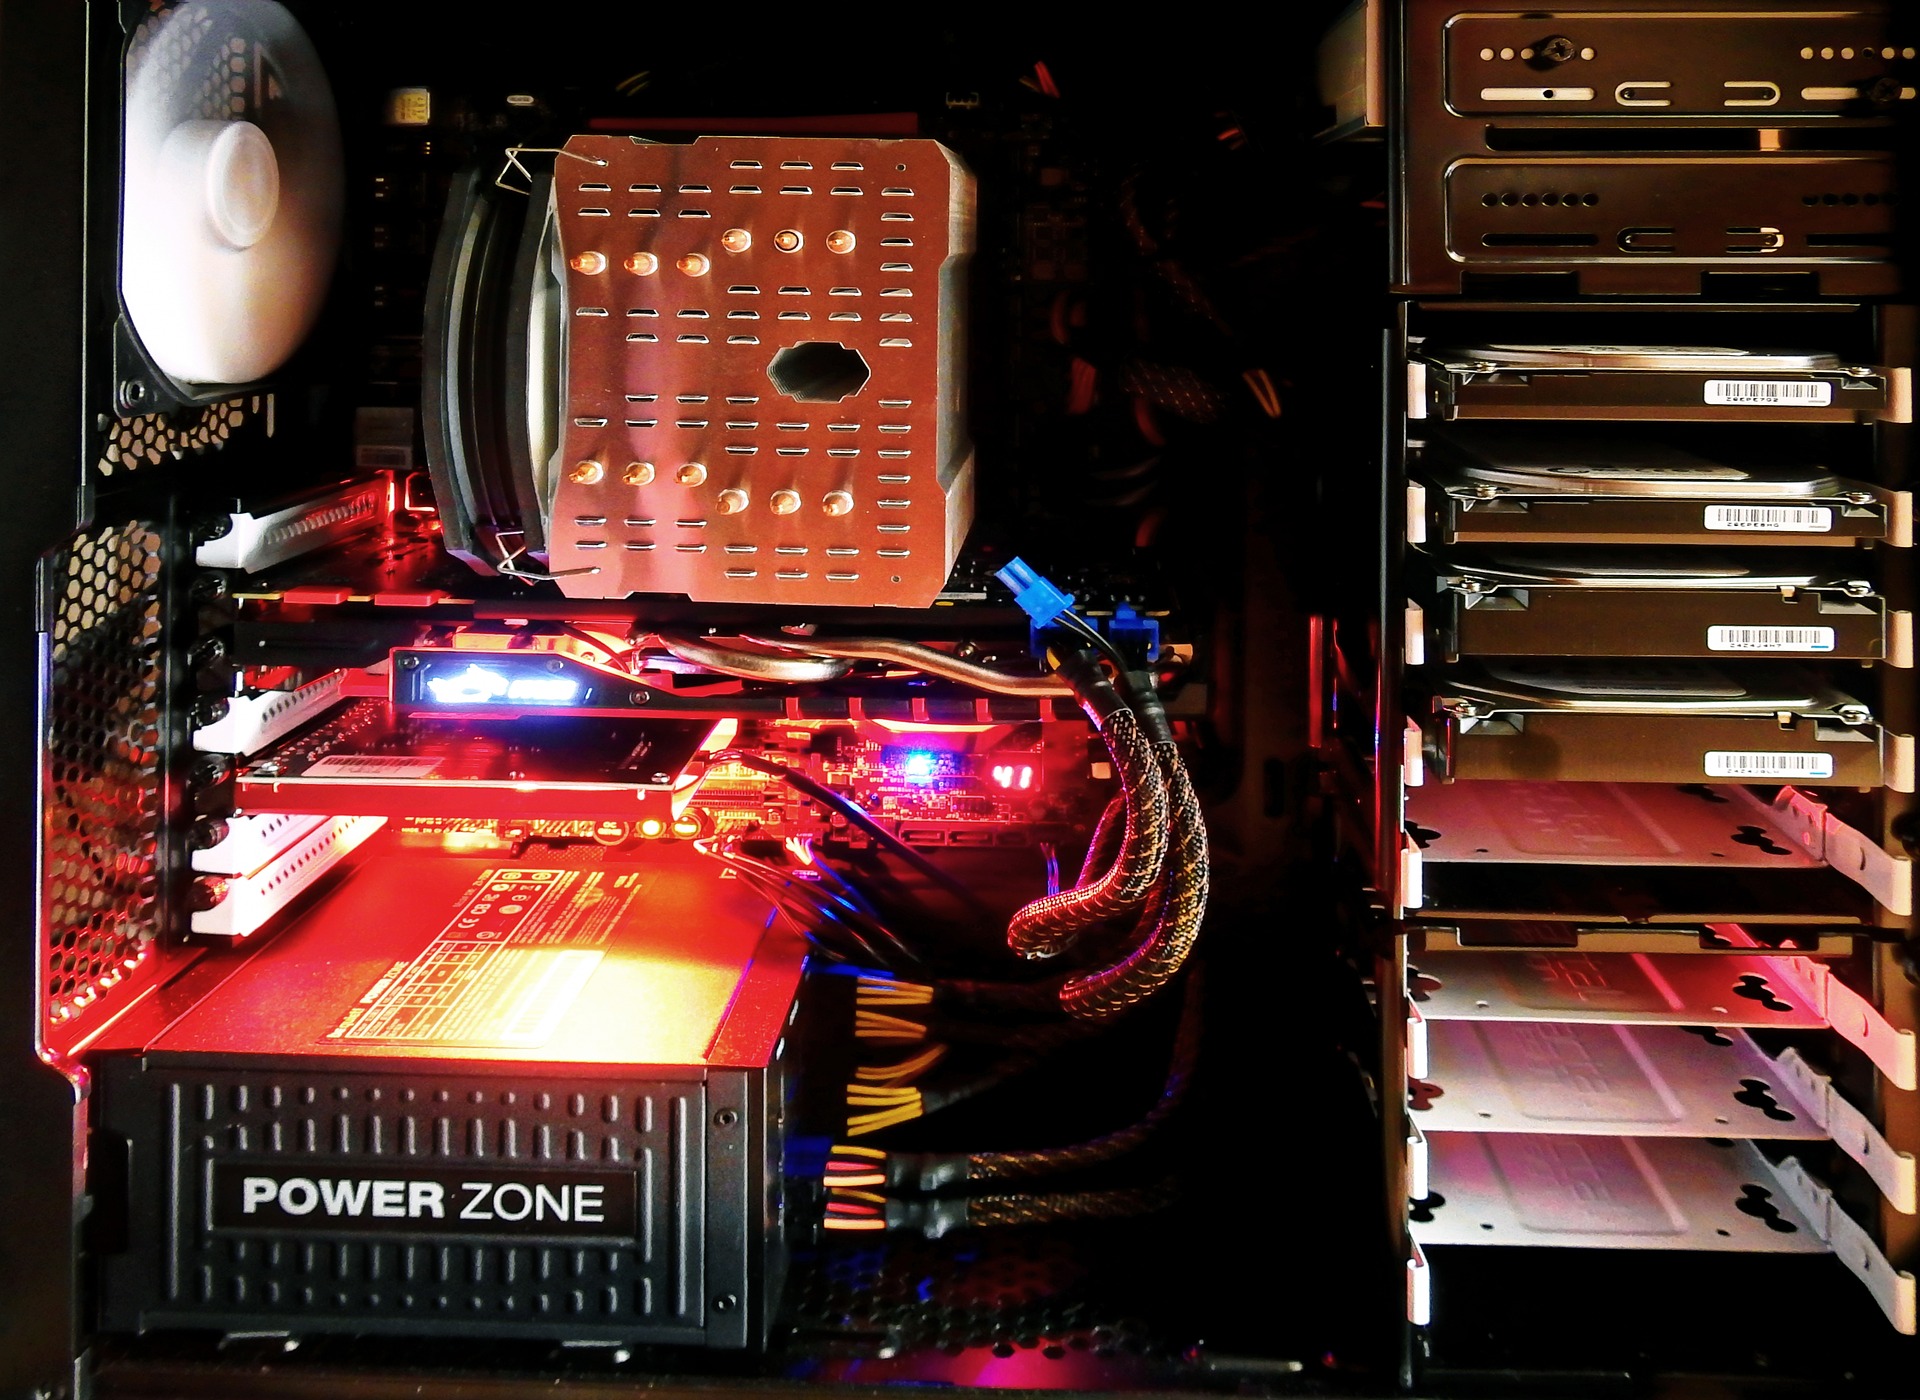 Geek insider, geekinsider, geekinsider. Com,, the ultimate guide to buying your gaming pc, gaming